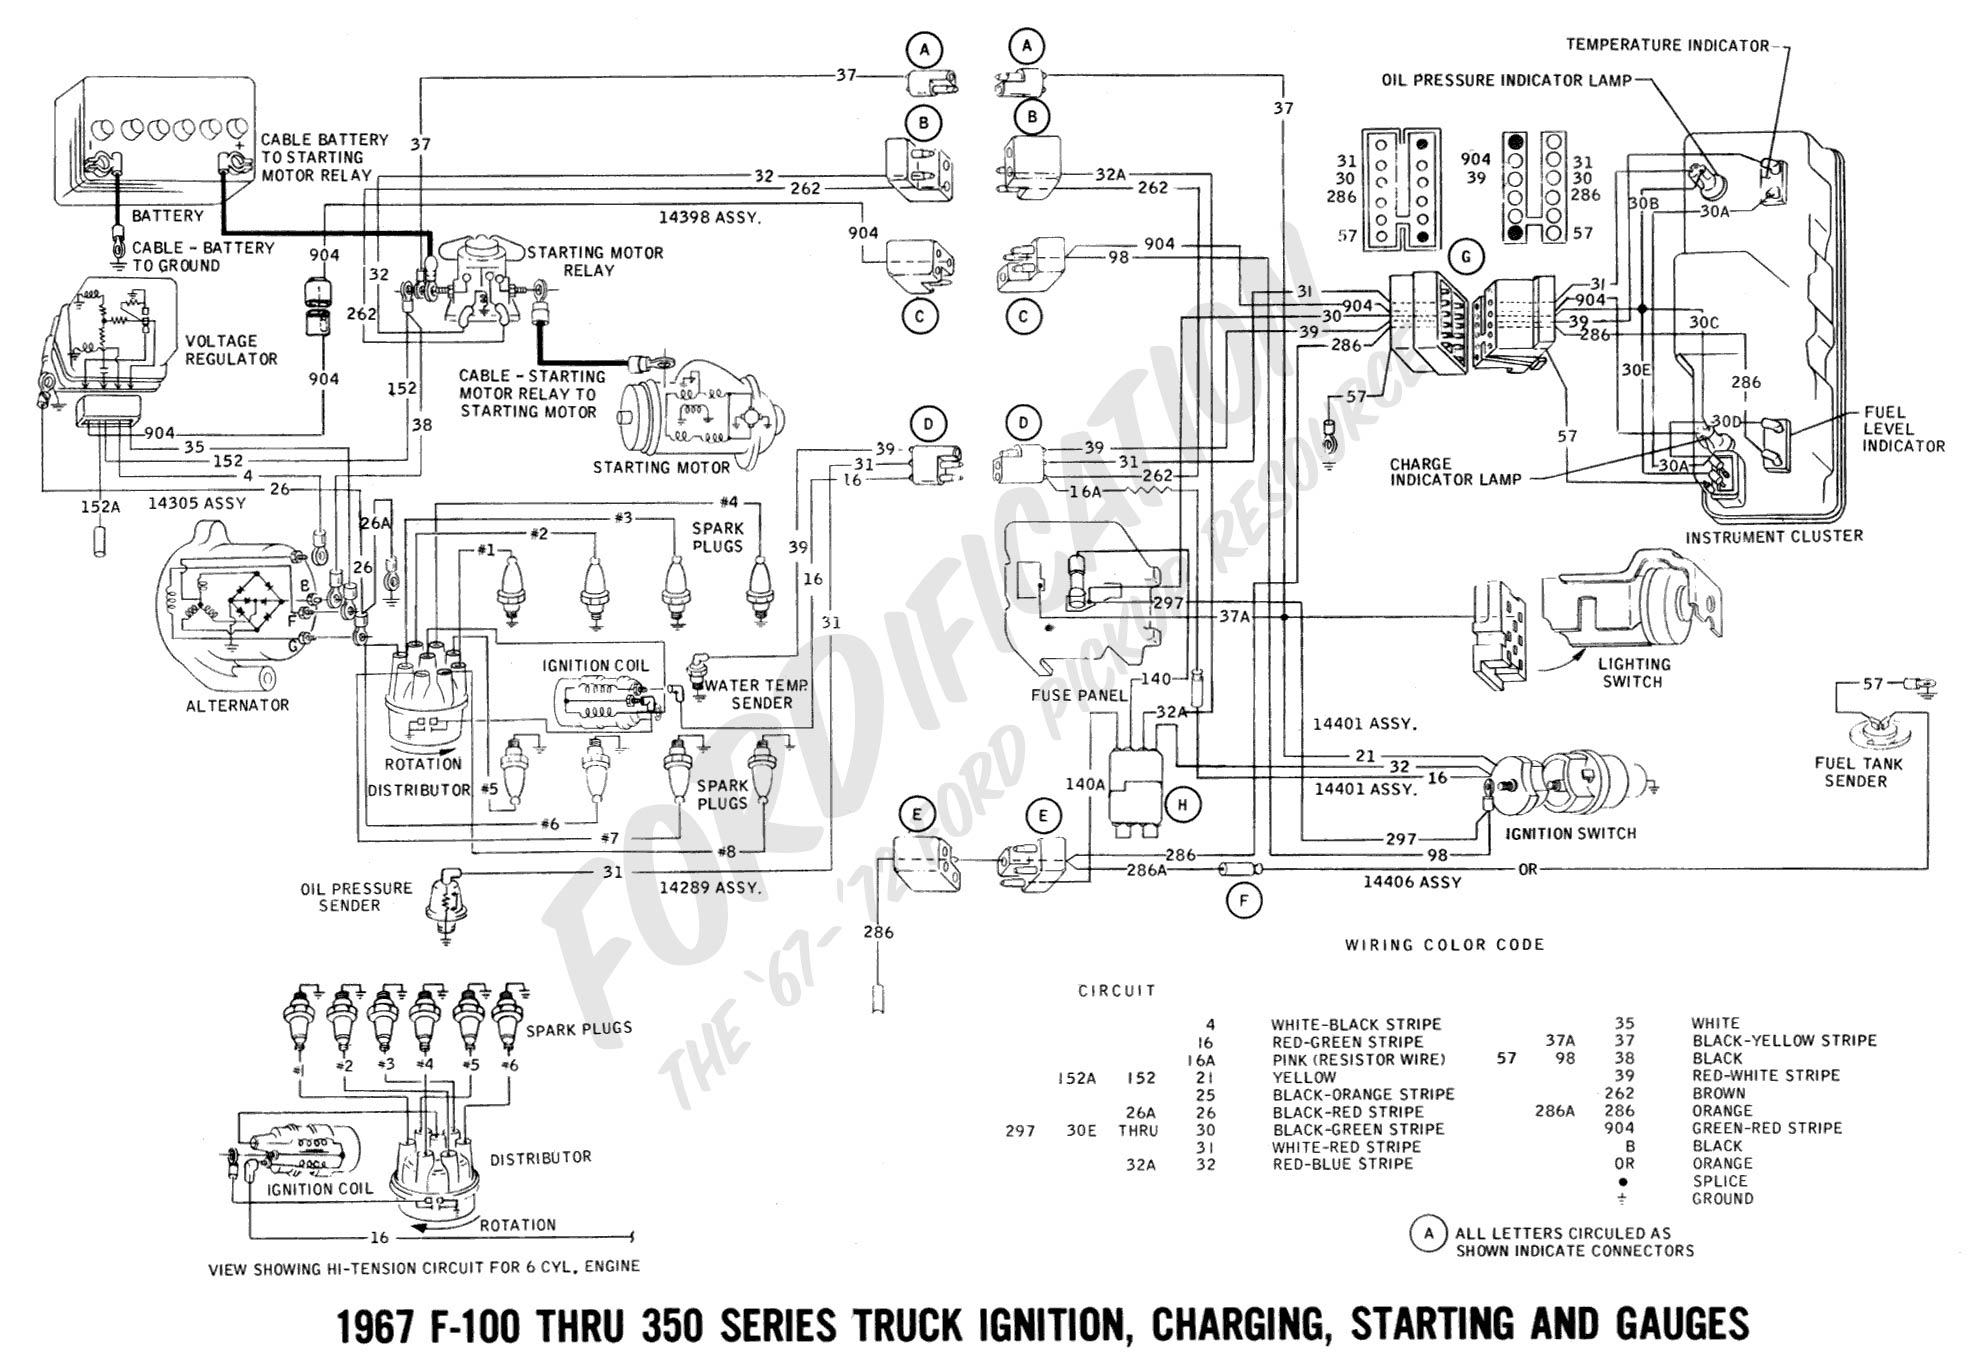 1999 Ford F53 Motorhome Chassis Wiring Diagram from www.fordification.com